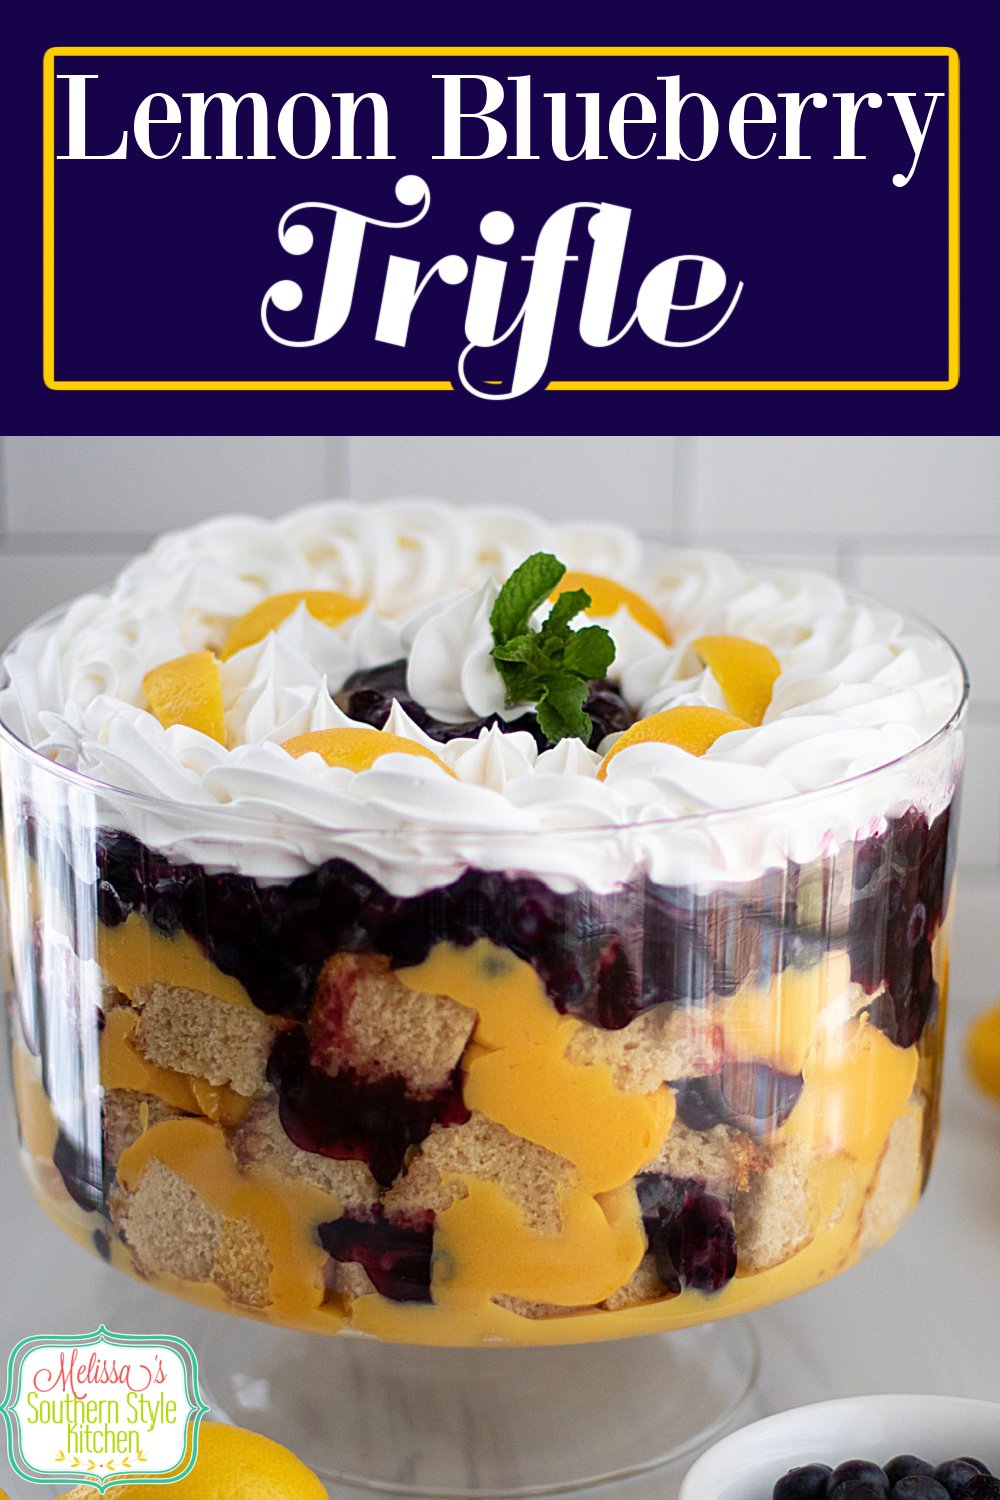 This stunning Blueberry Lemon Trifle recipe is an edible centerpiece guaranteed to add height and beauty to the dessert table #blueberrylemontrifle #lemontriflerecipe #bestlemontriflerecipe #blueberries #lemondesserts #poundcaketrifle via @melissasssk